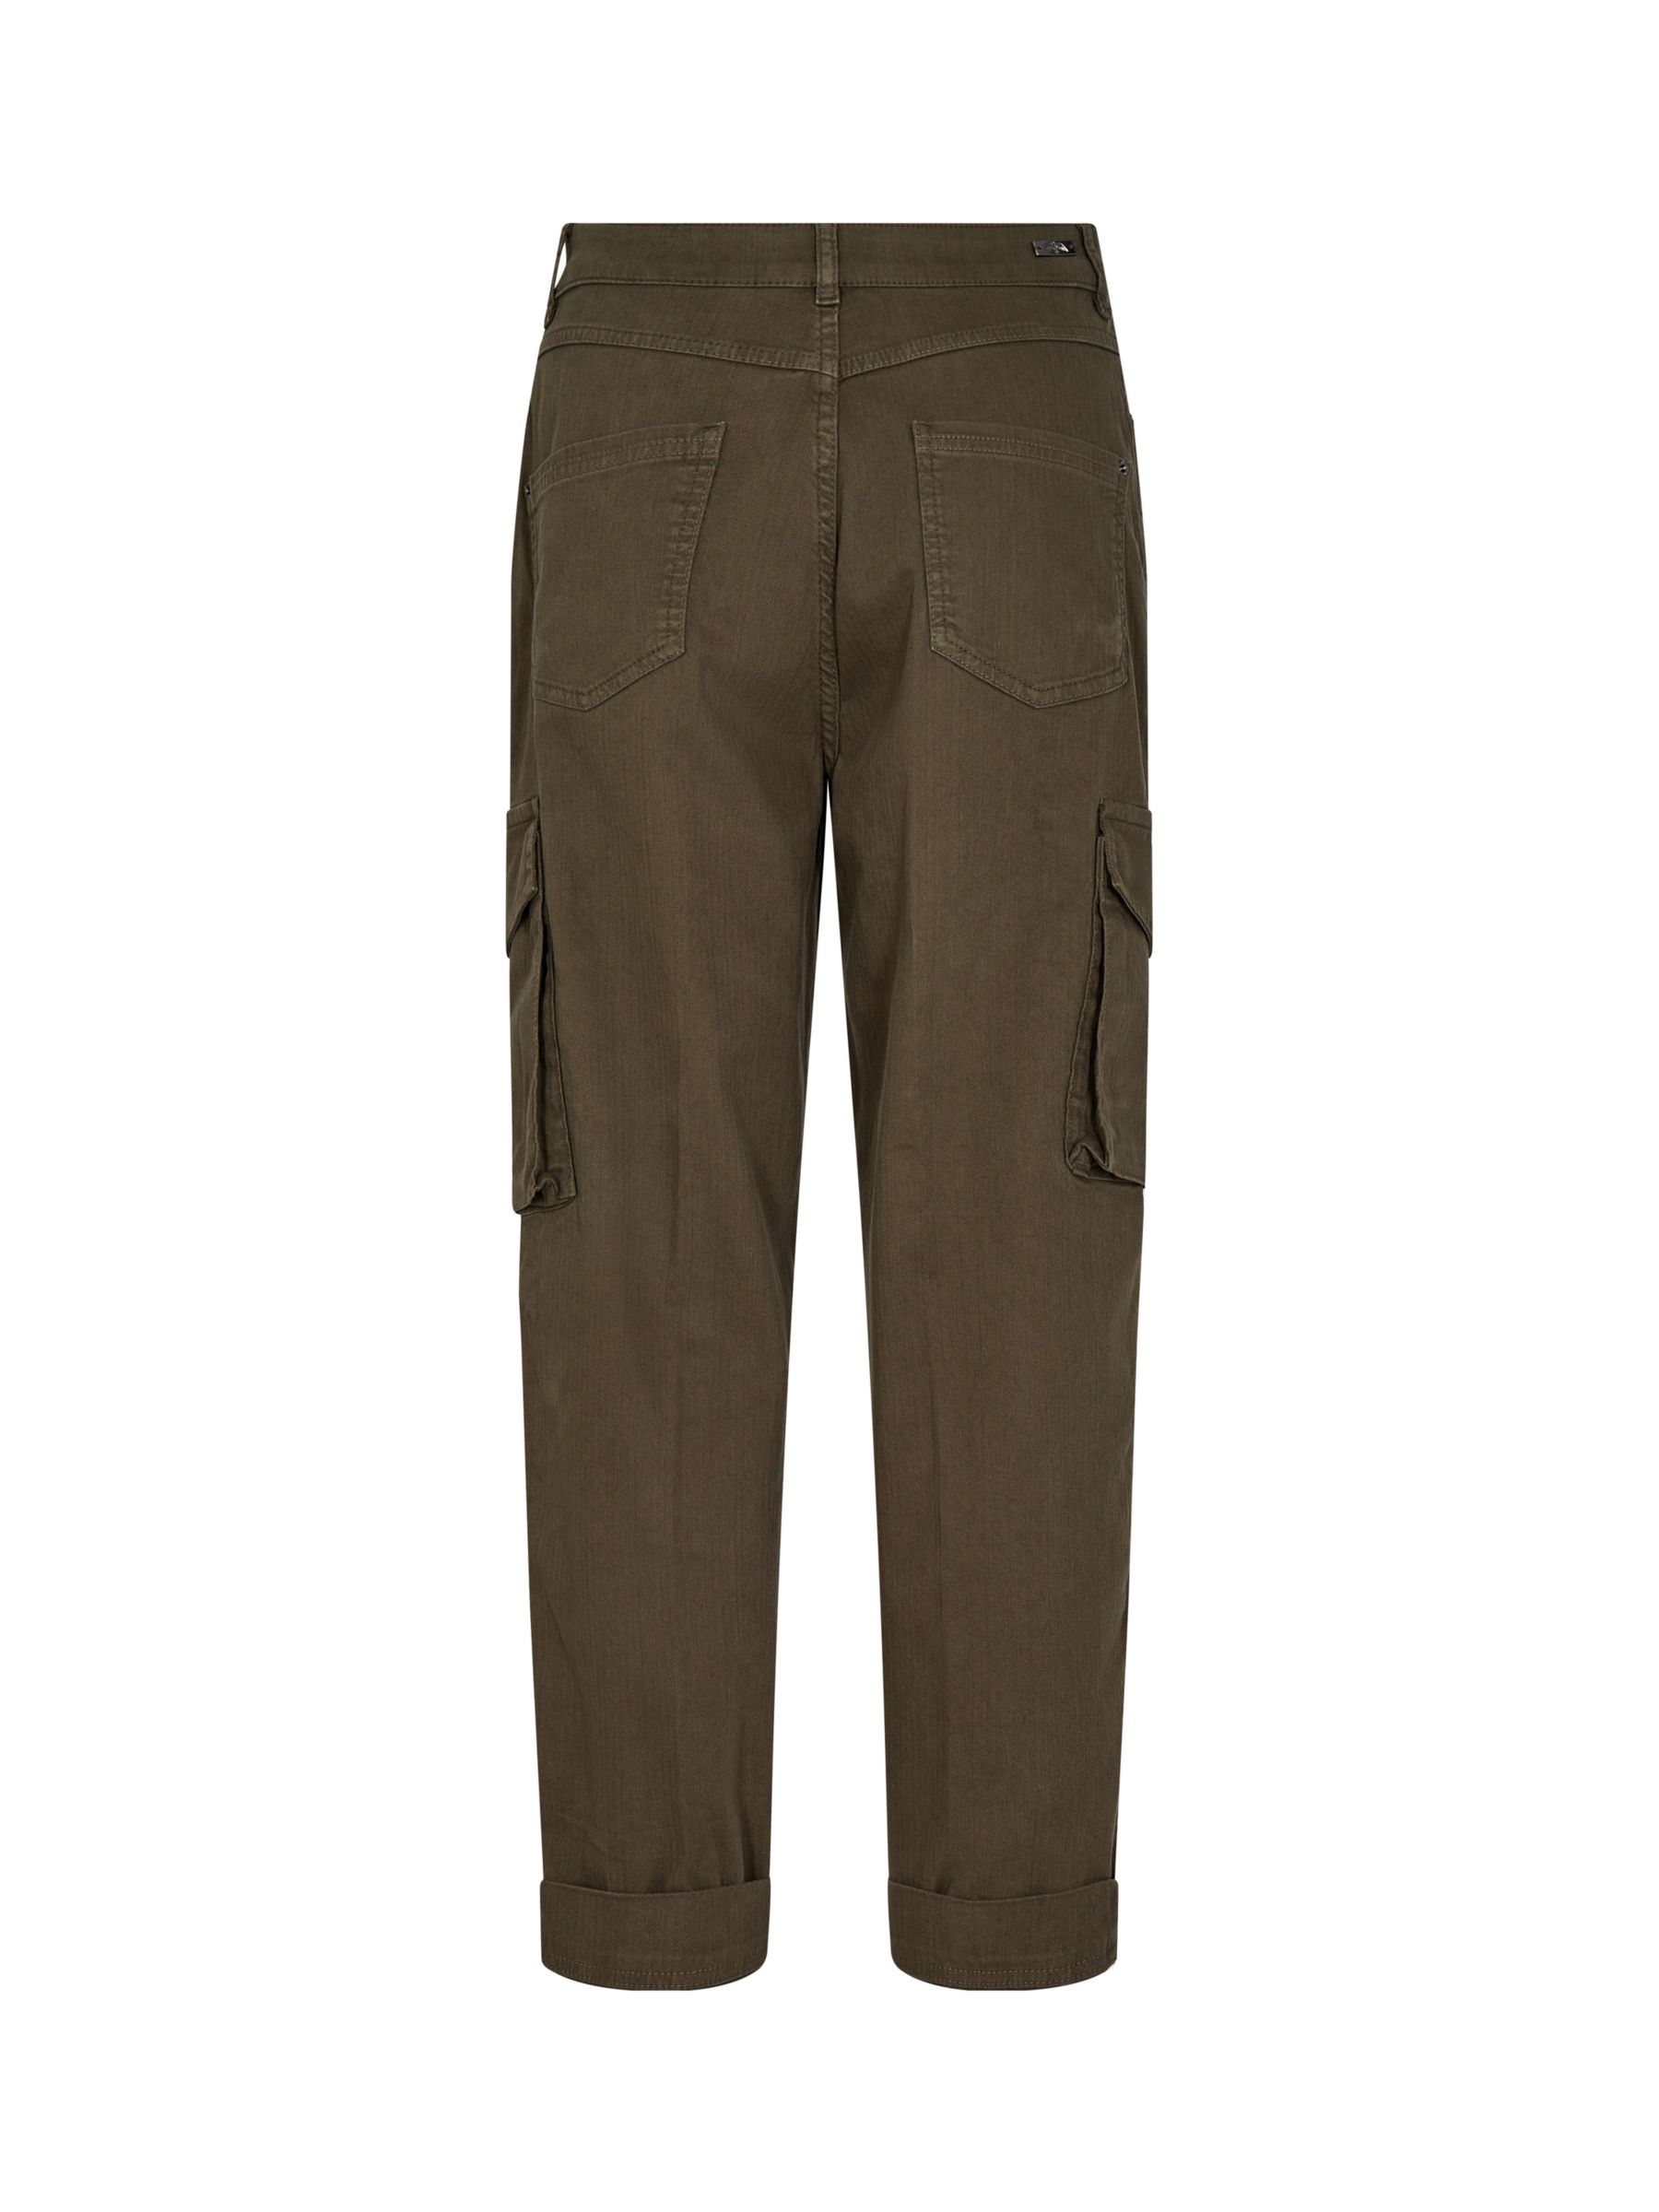 Buy MOS MOSH Adeline Cargo Trouser, Forest Night Online at johnlewis.com